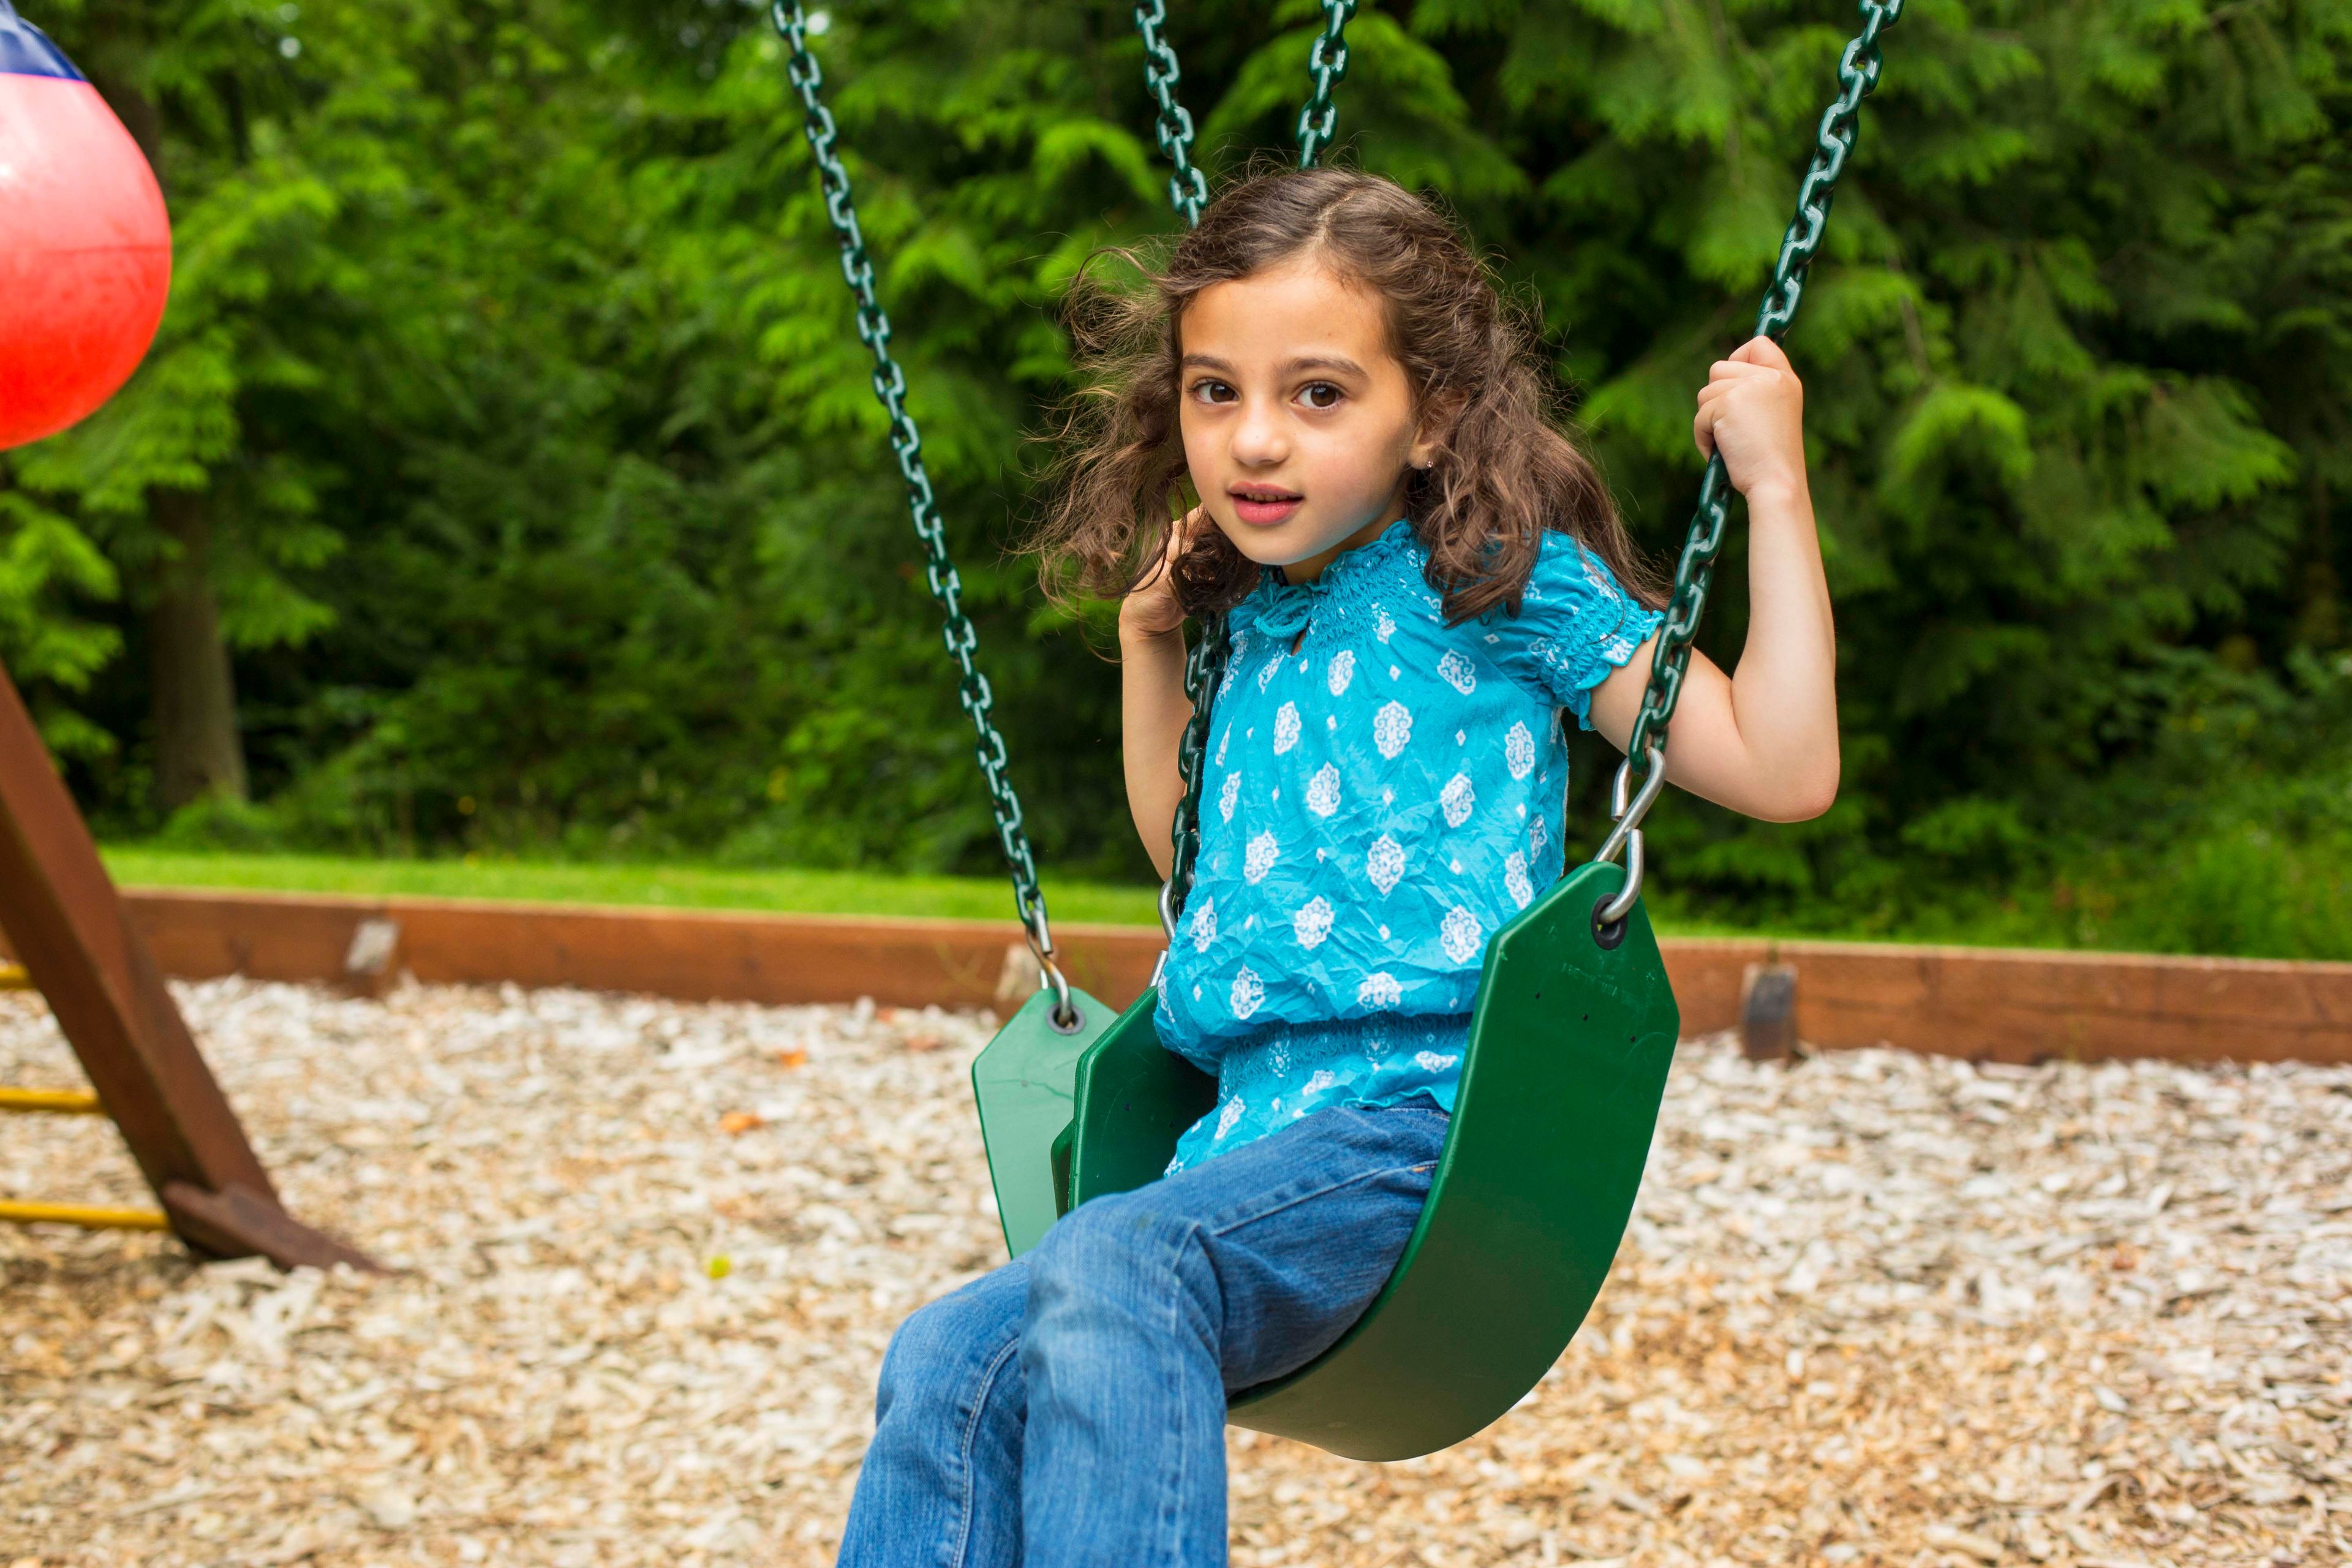 A young girl swinging.  